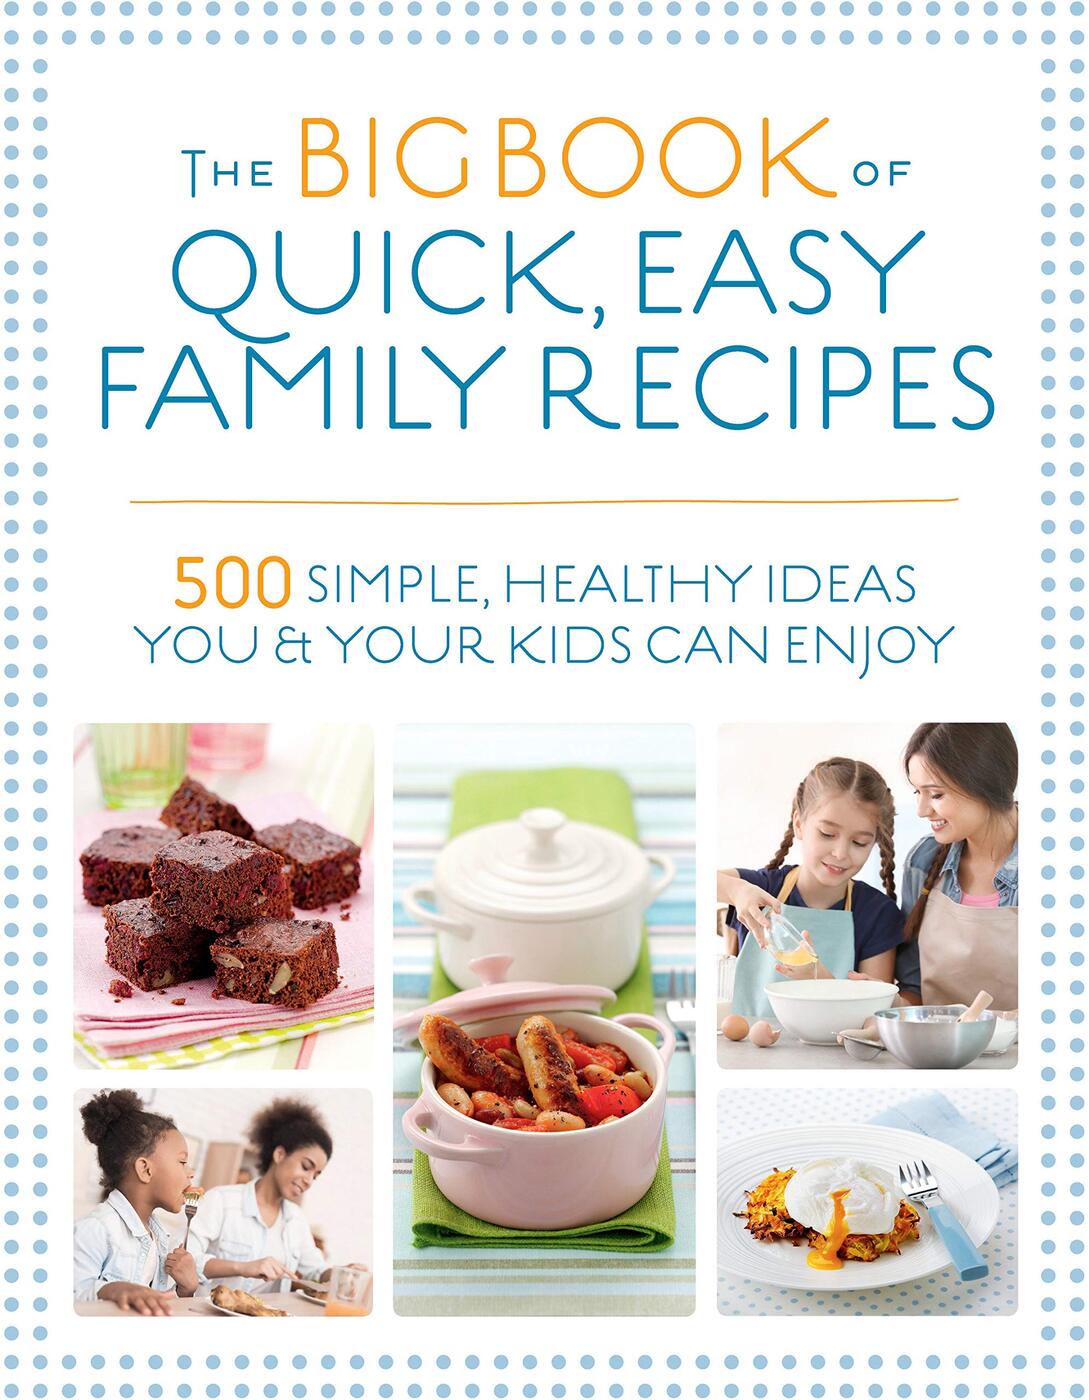 Books about Family Recipes. Easy family